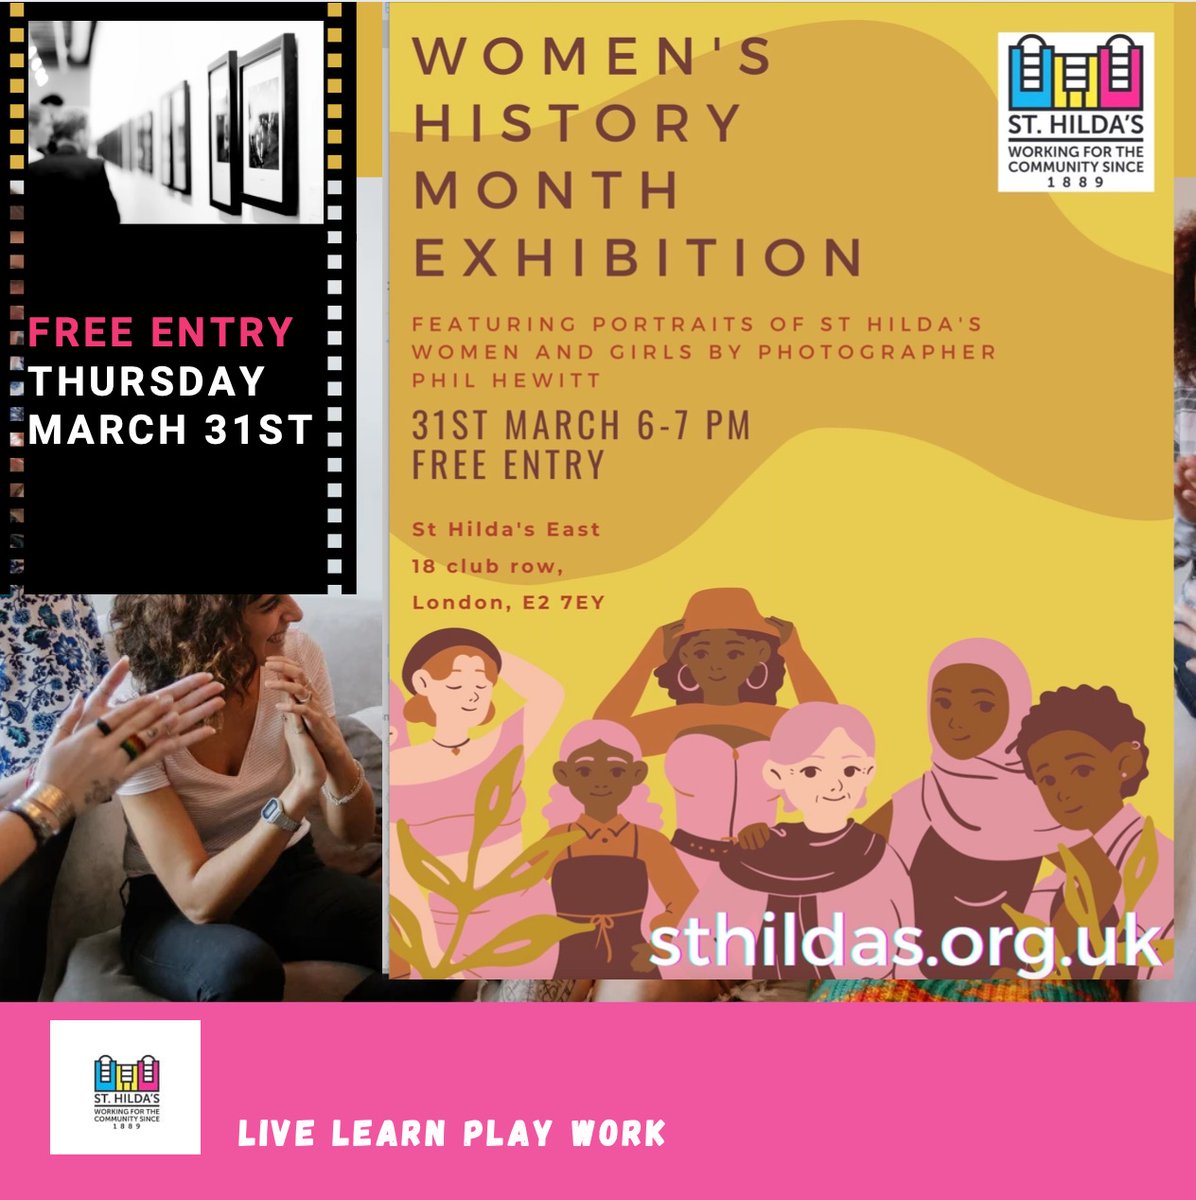 Want more quality time with your mum? Join us the Women’s History Month Exhibition featuring portraits of St.Hilda’s East Women and Girls by Photographer Phil Hewitt. St. Hilda's East 6- 7pm on Thursday 31st March 2022 @StHildasEast #womenatoxford #cheltladiescoll #philhewitt